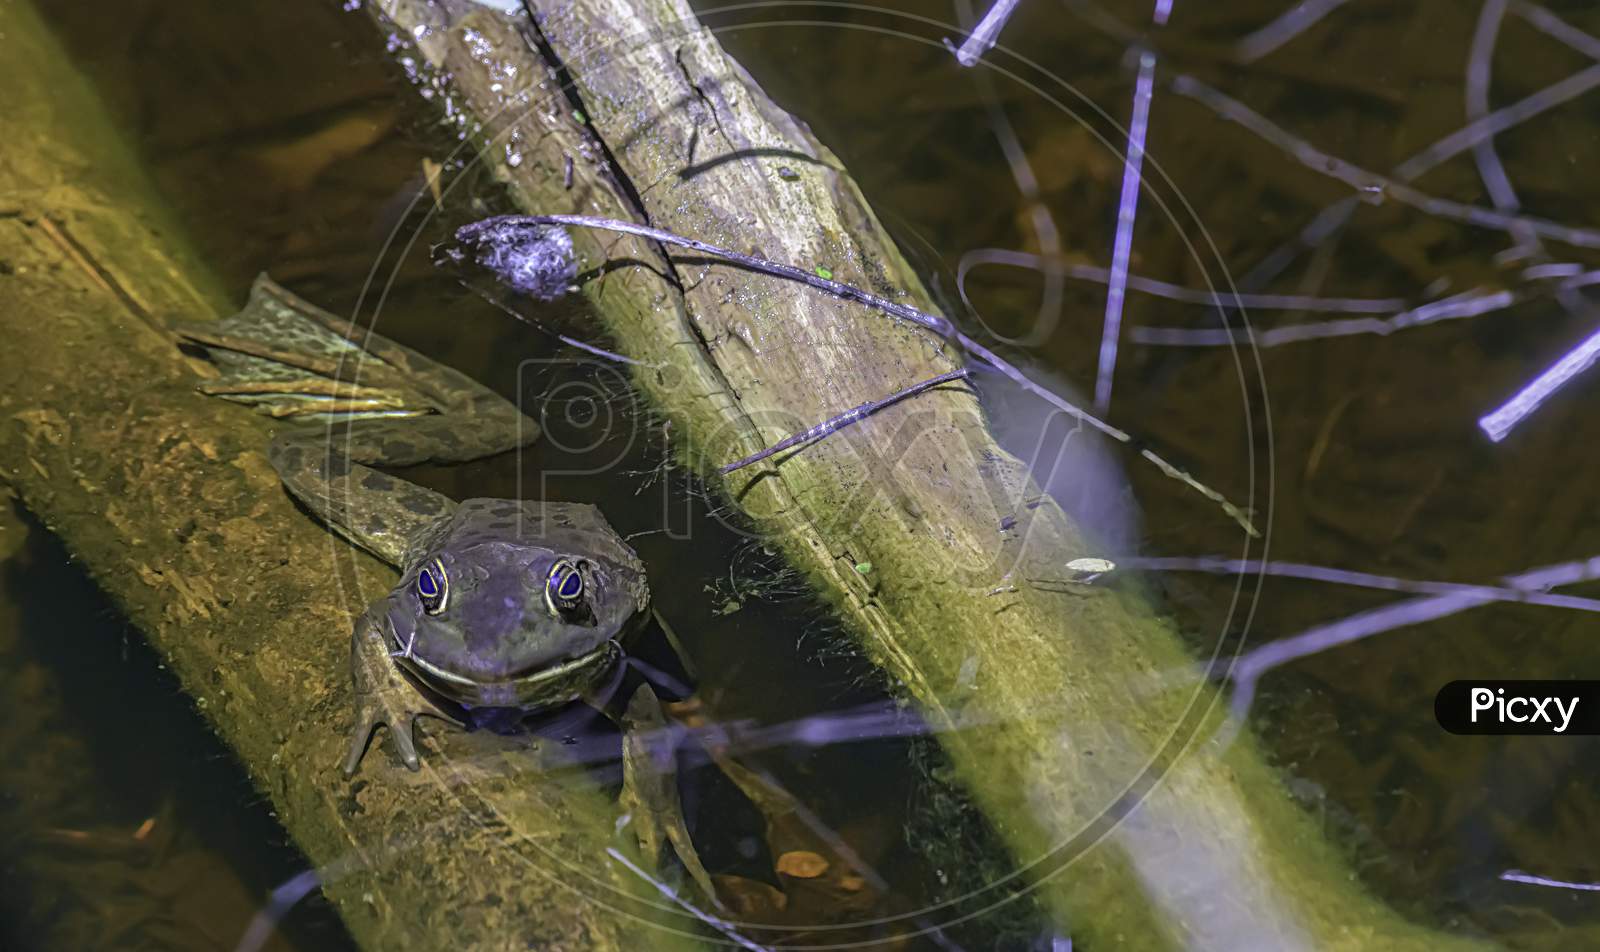 Webfoot Bull Frog In The Water Hanging On To A Small Log.